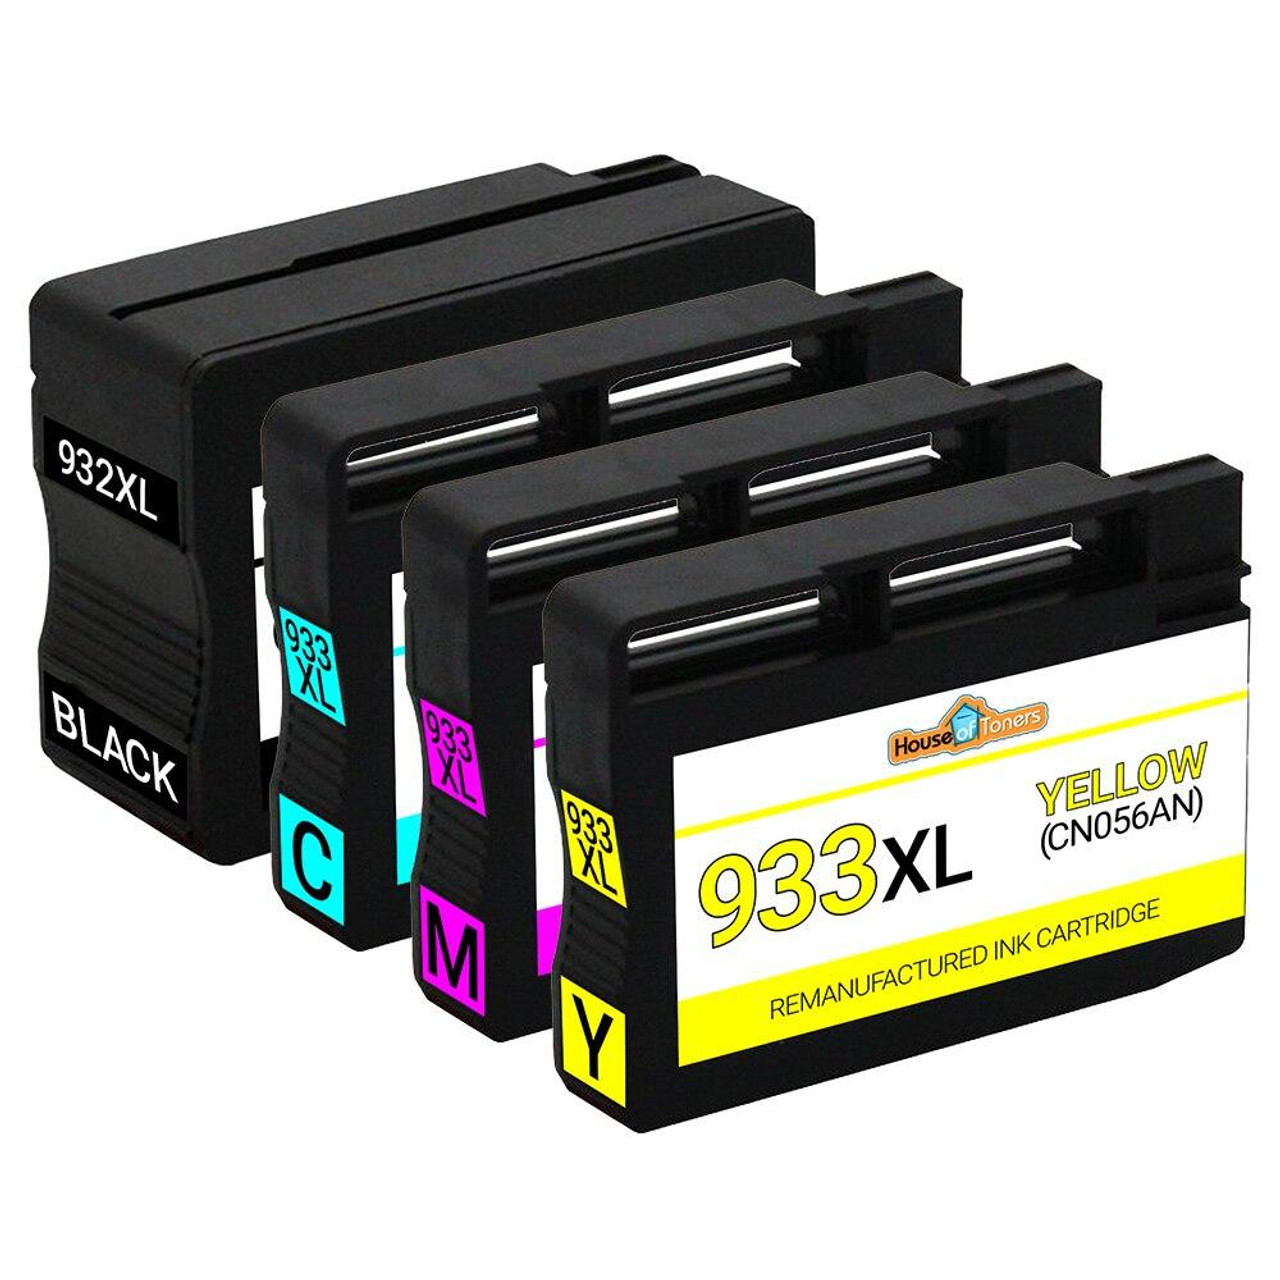 Remanufactured Cartridge for HP 932XL & 933XL HY 4PK - BCMY